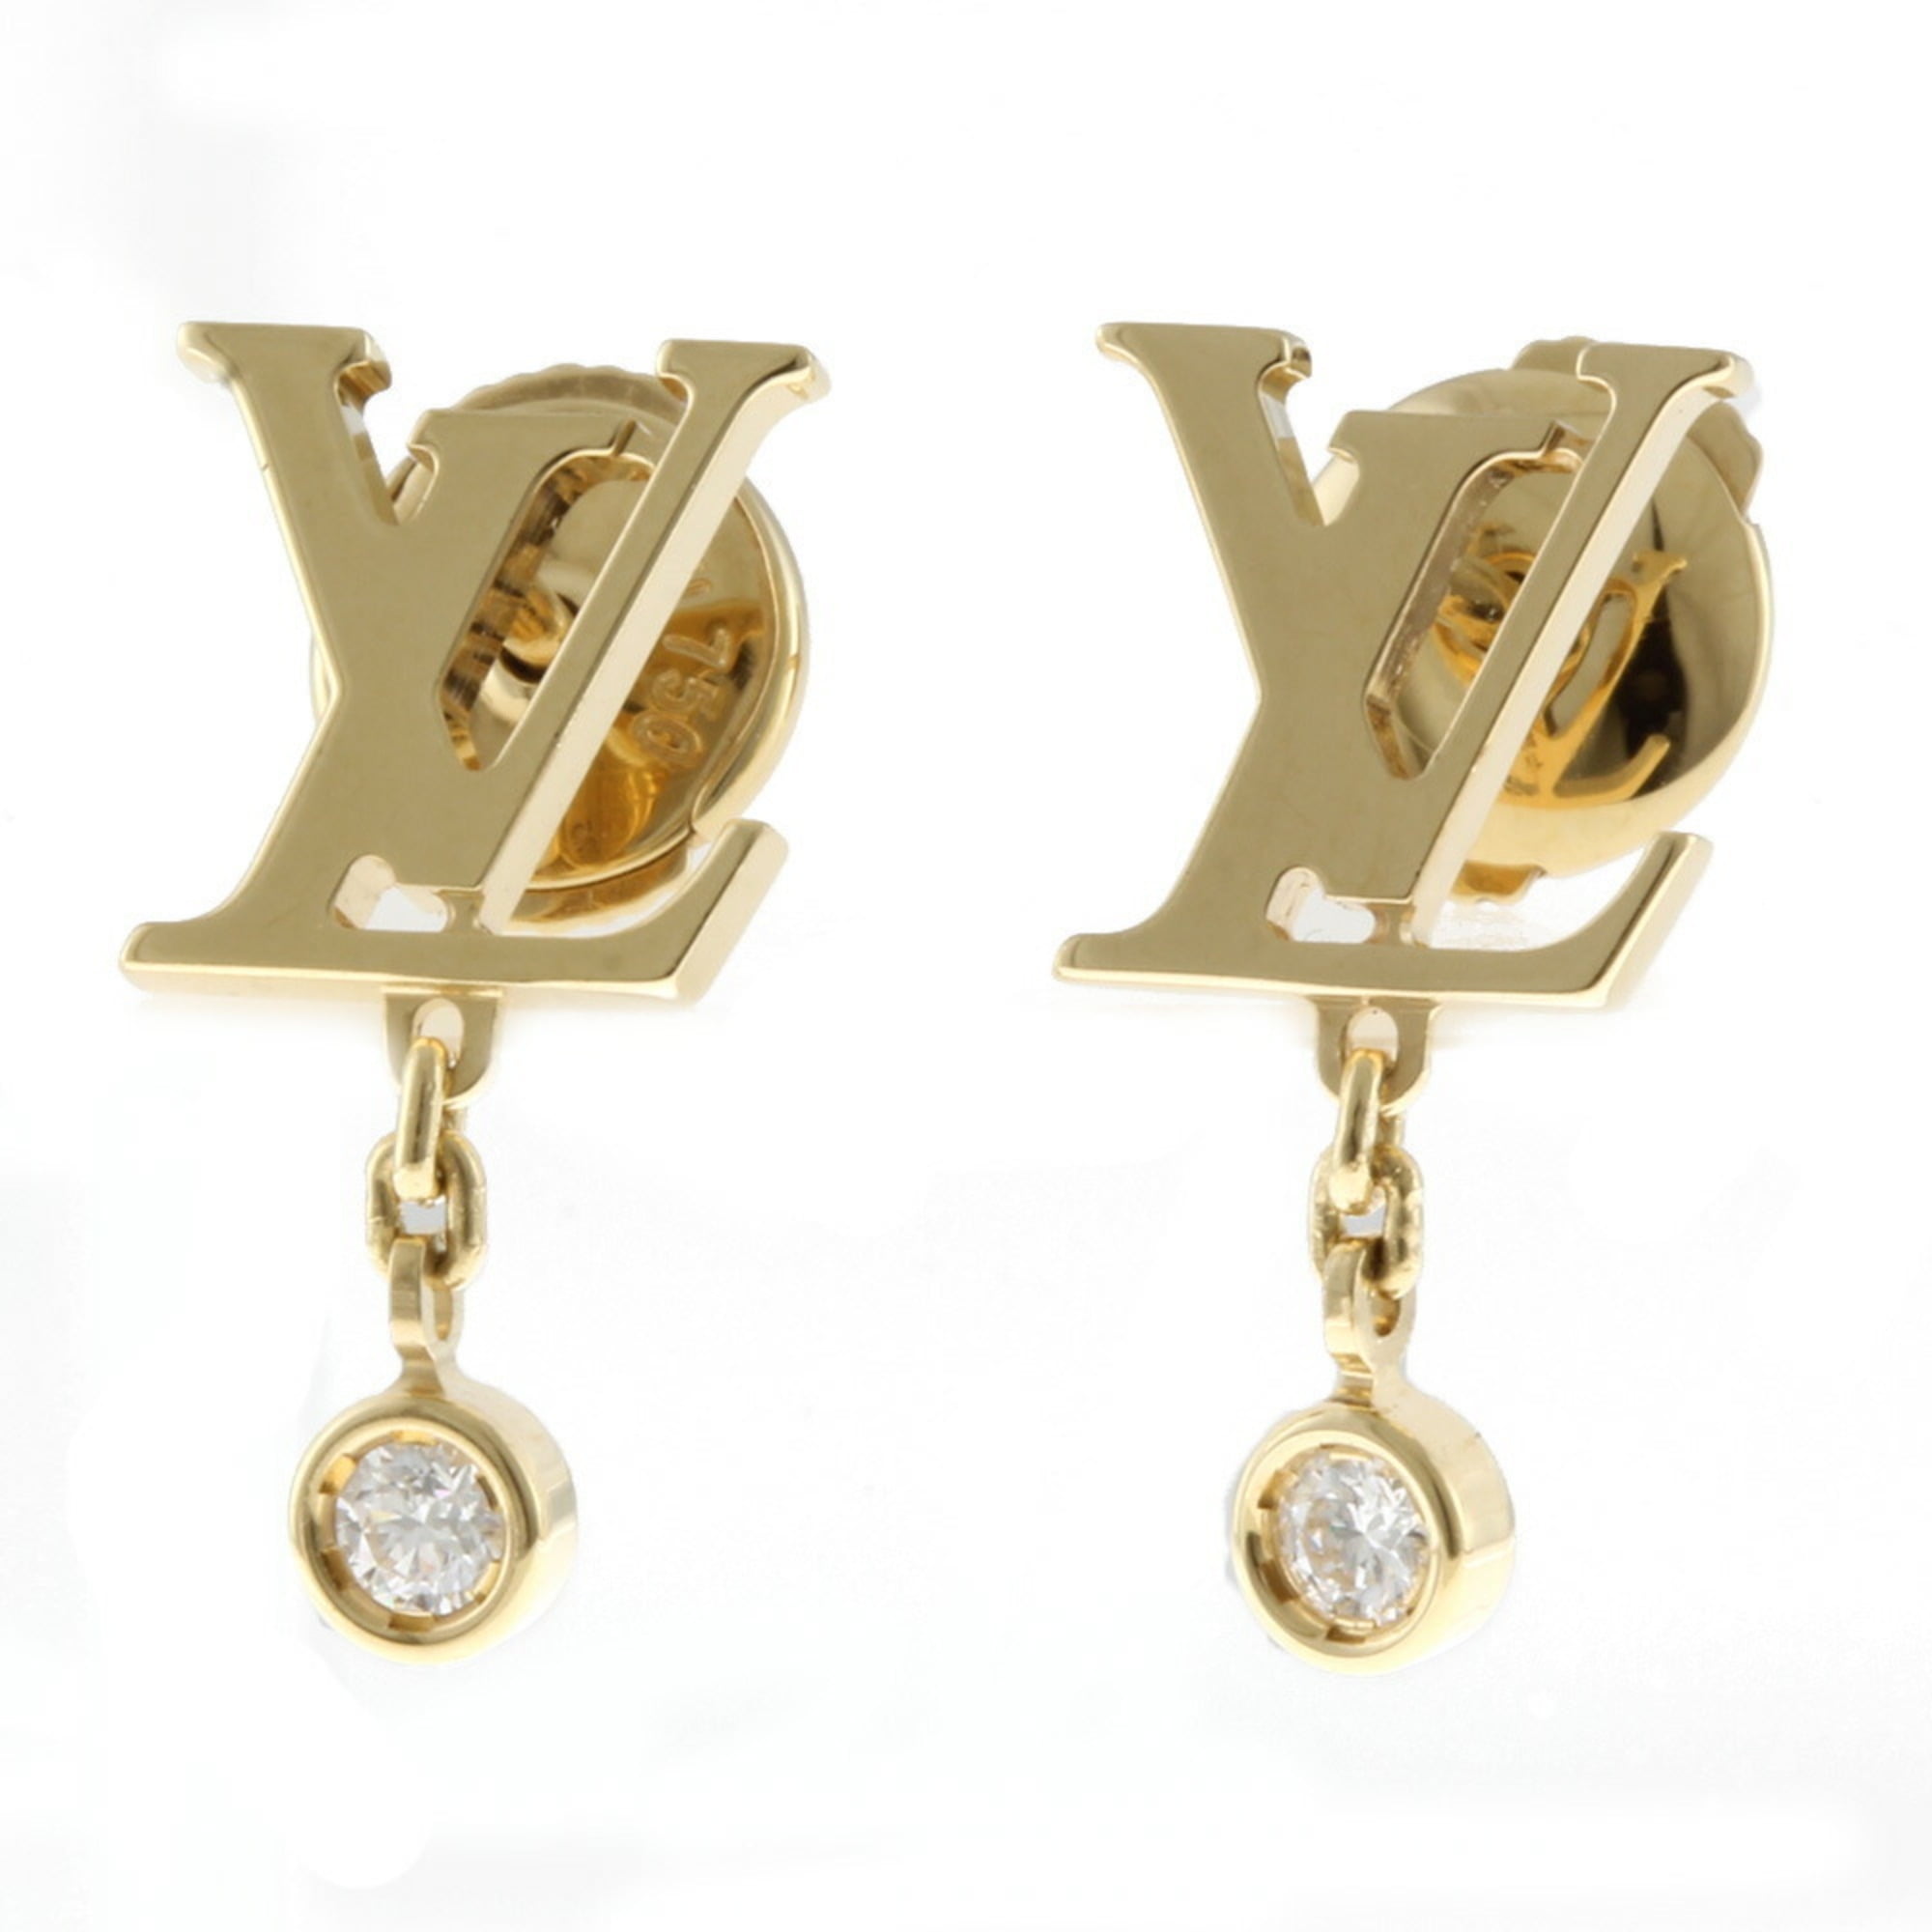 Authenticated Used Louis Vuitton LOUIS VUITTON Pusui Deal Blossom Earrings  18K K18 Yellow Gold Diamond Women's